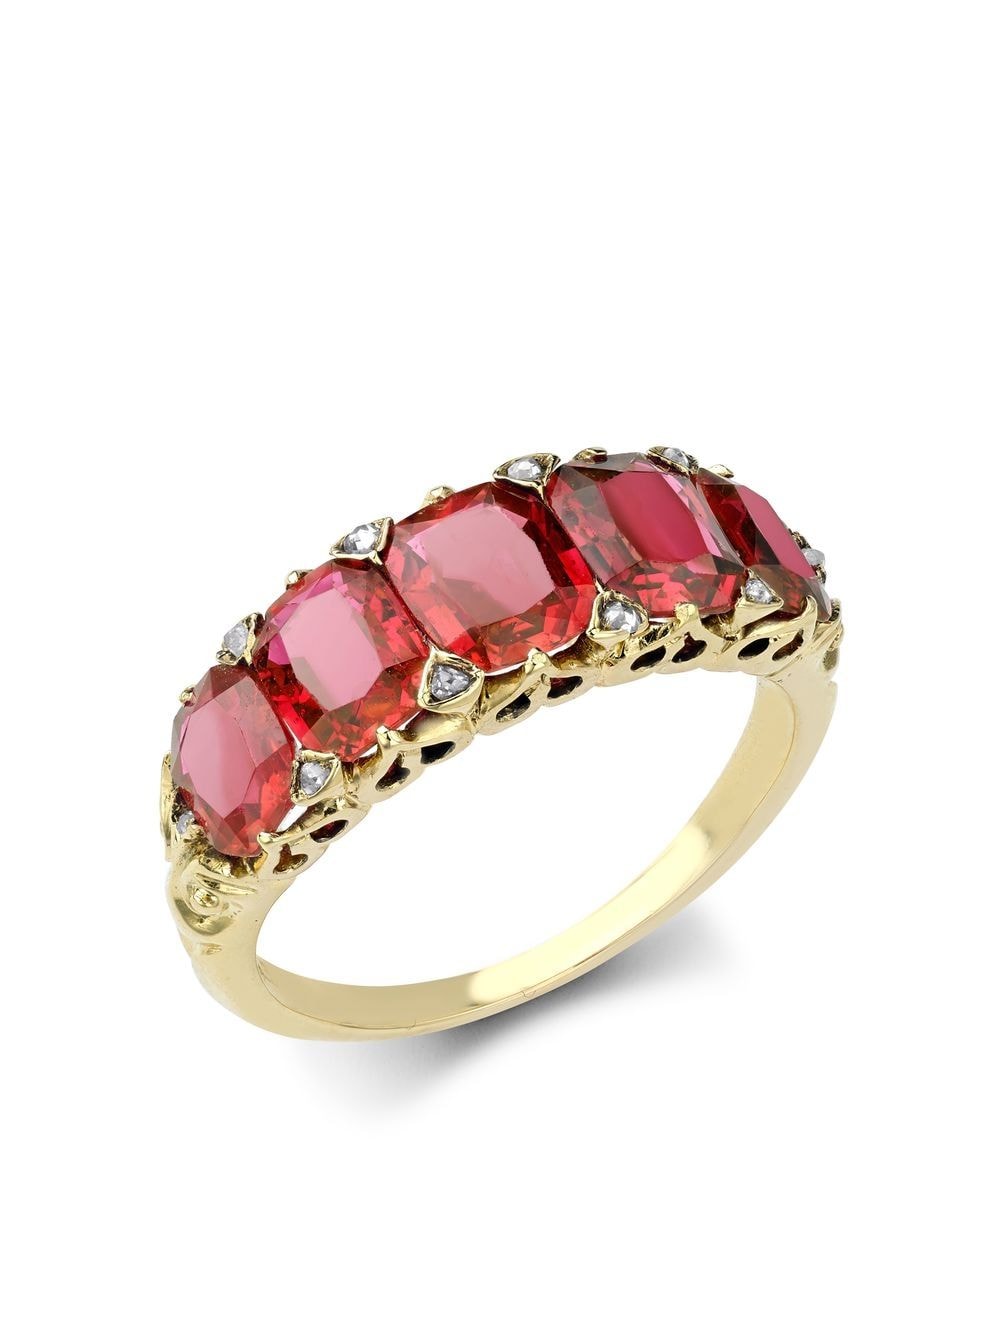 Pre-owned Pragnell Vintage 18kt Yellow Gold Victorian Five Stone Burmese Ruby Ring